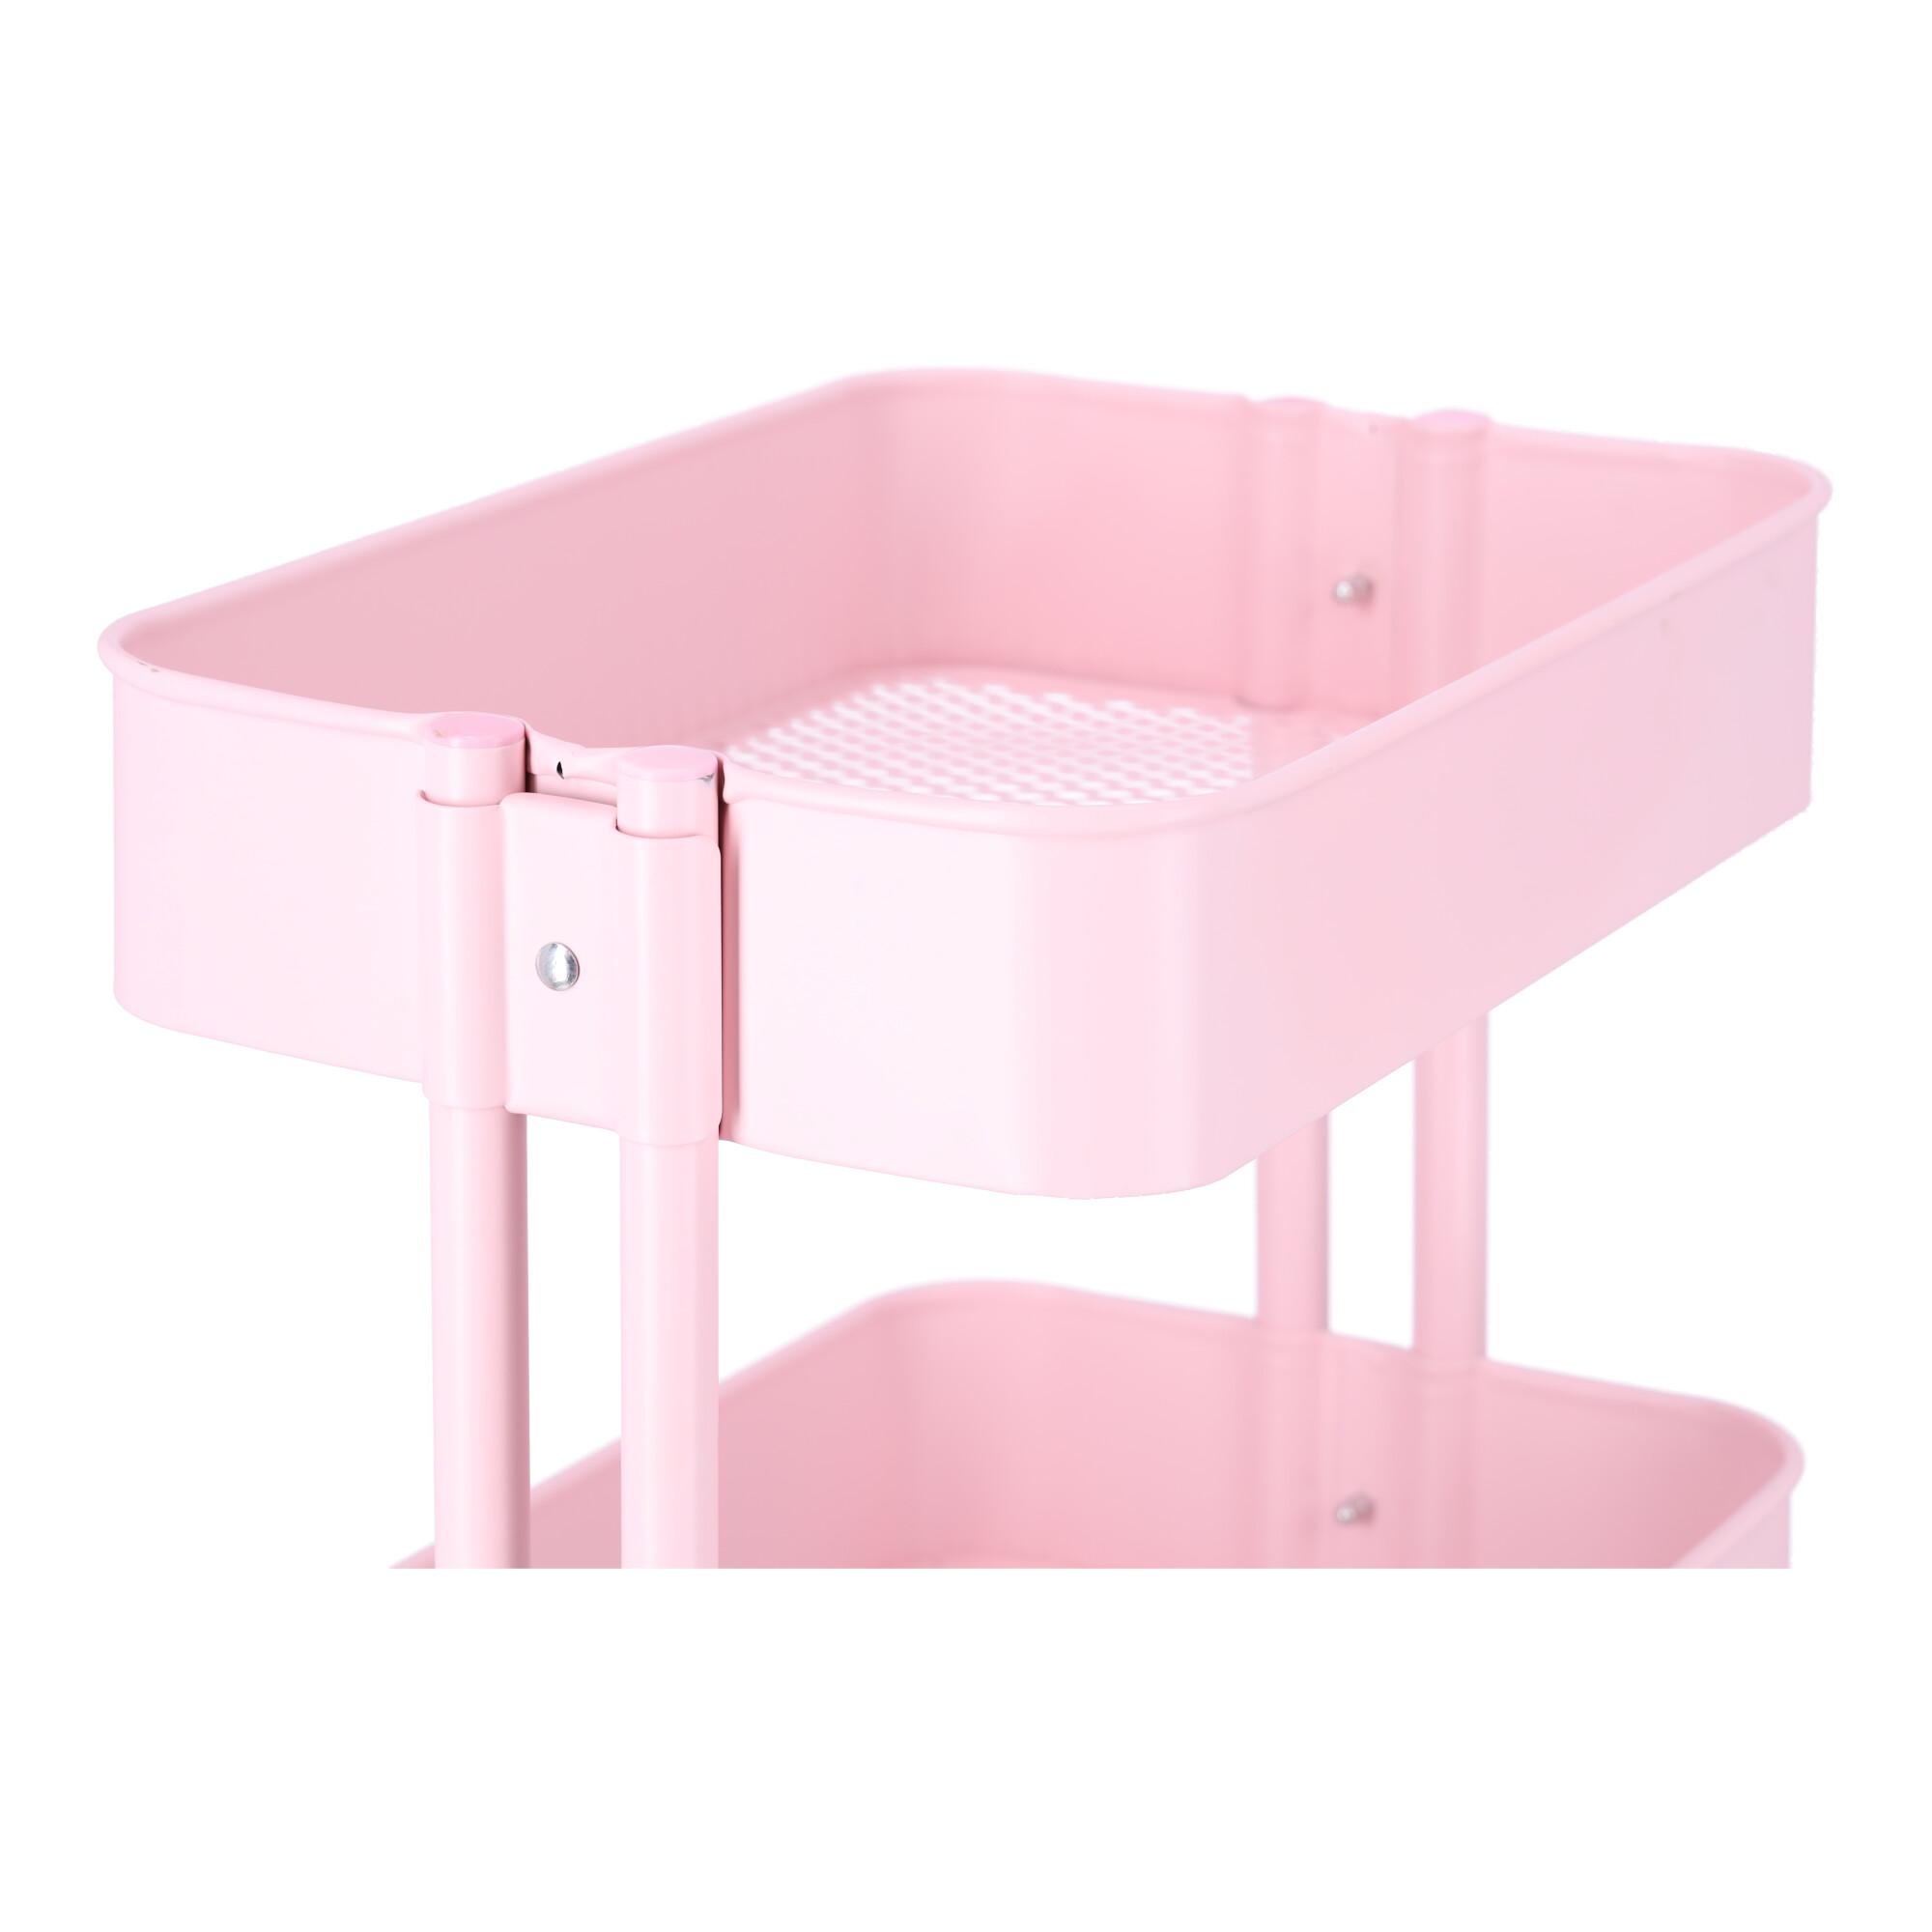 Multifunctional cabinet on wheels with three capacious shelves - pink